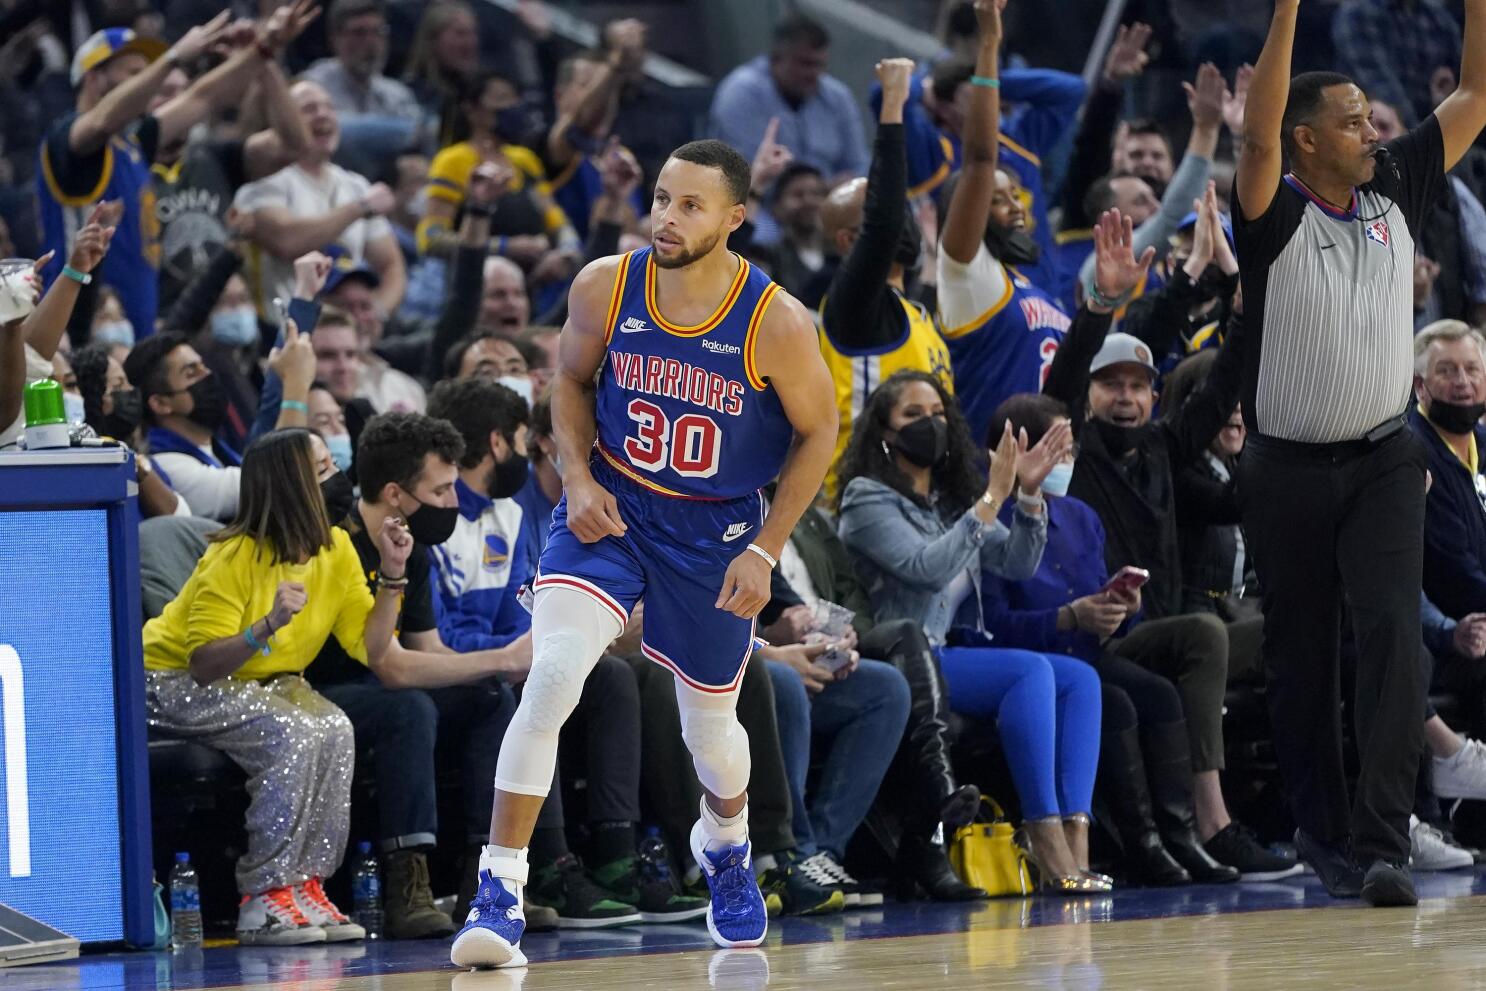 Steph Curry's cold shooting night ends historic run of made three-pointers